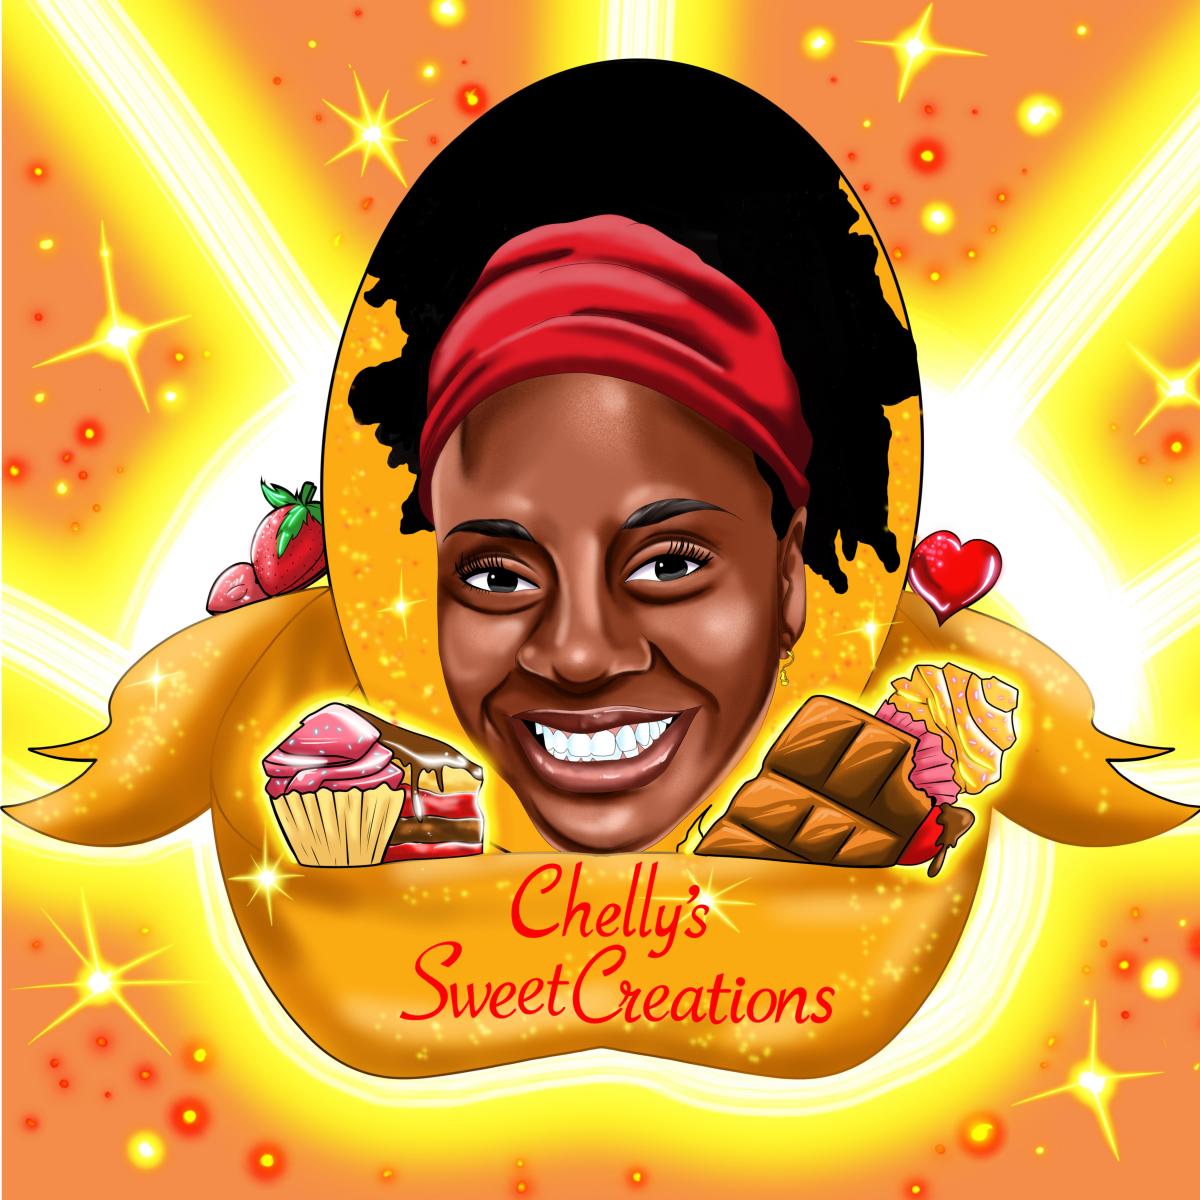 Chelly's Sweet User Profile